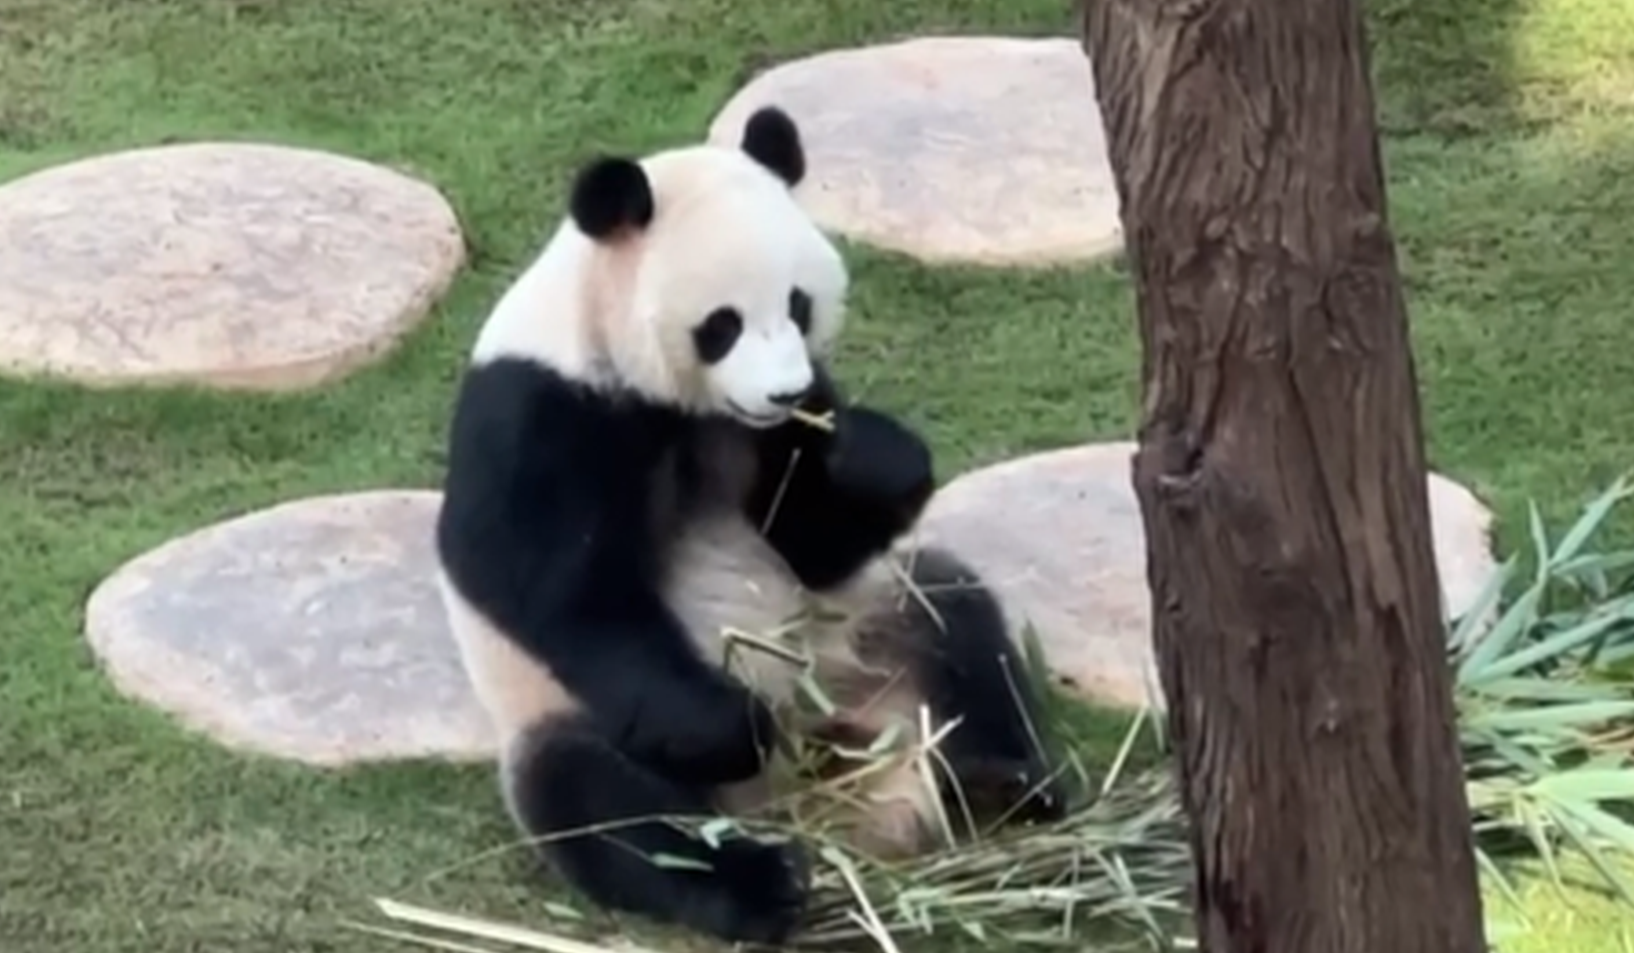 Chinese giant pandas meet the public ahead of World Cup in Qatar 